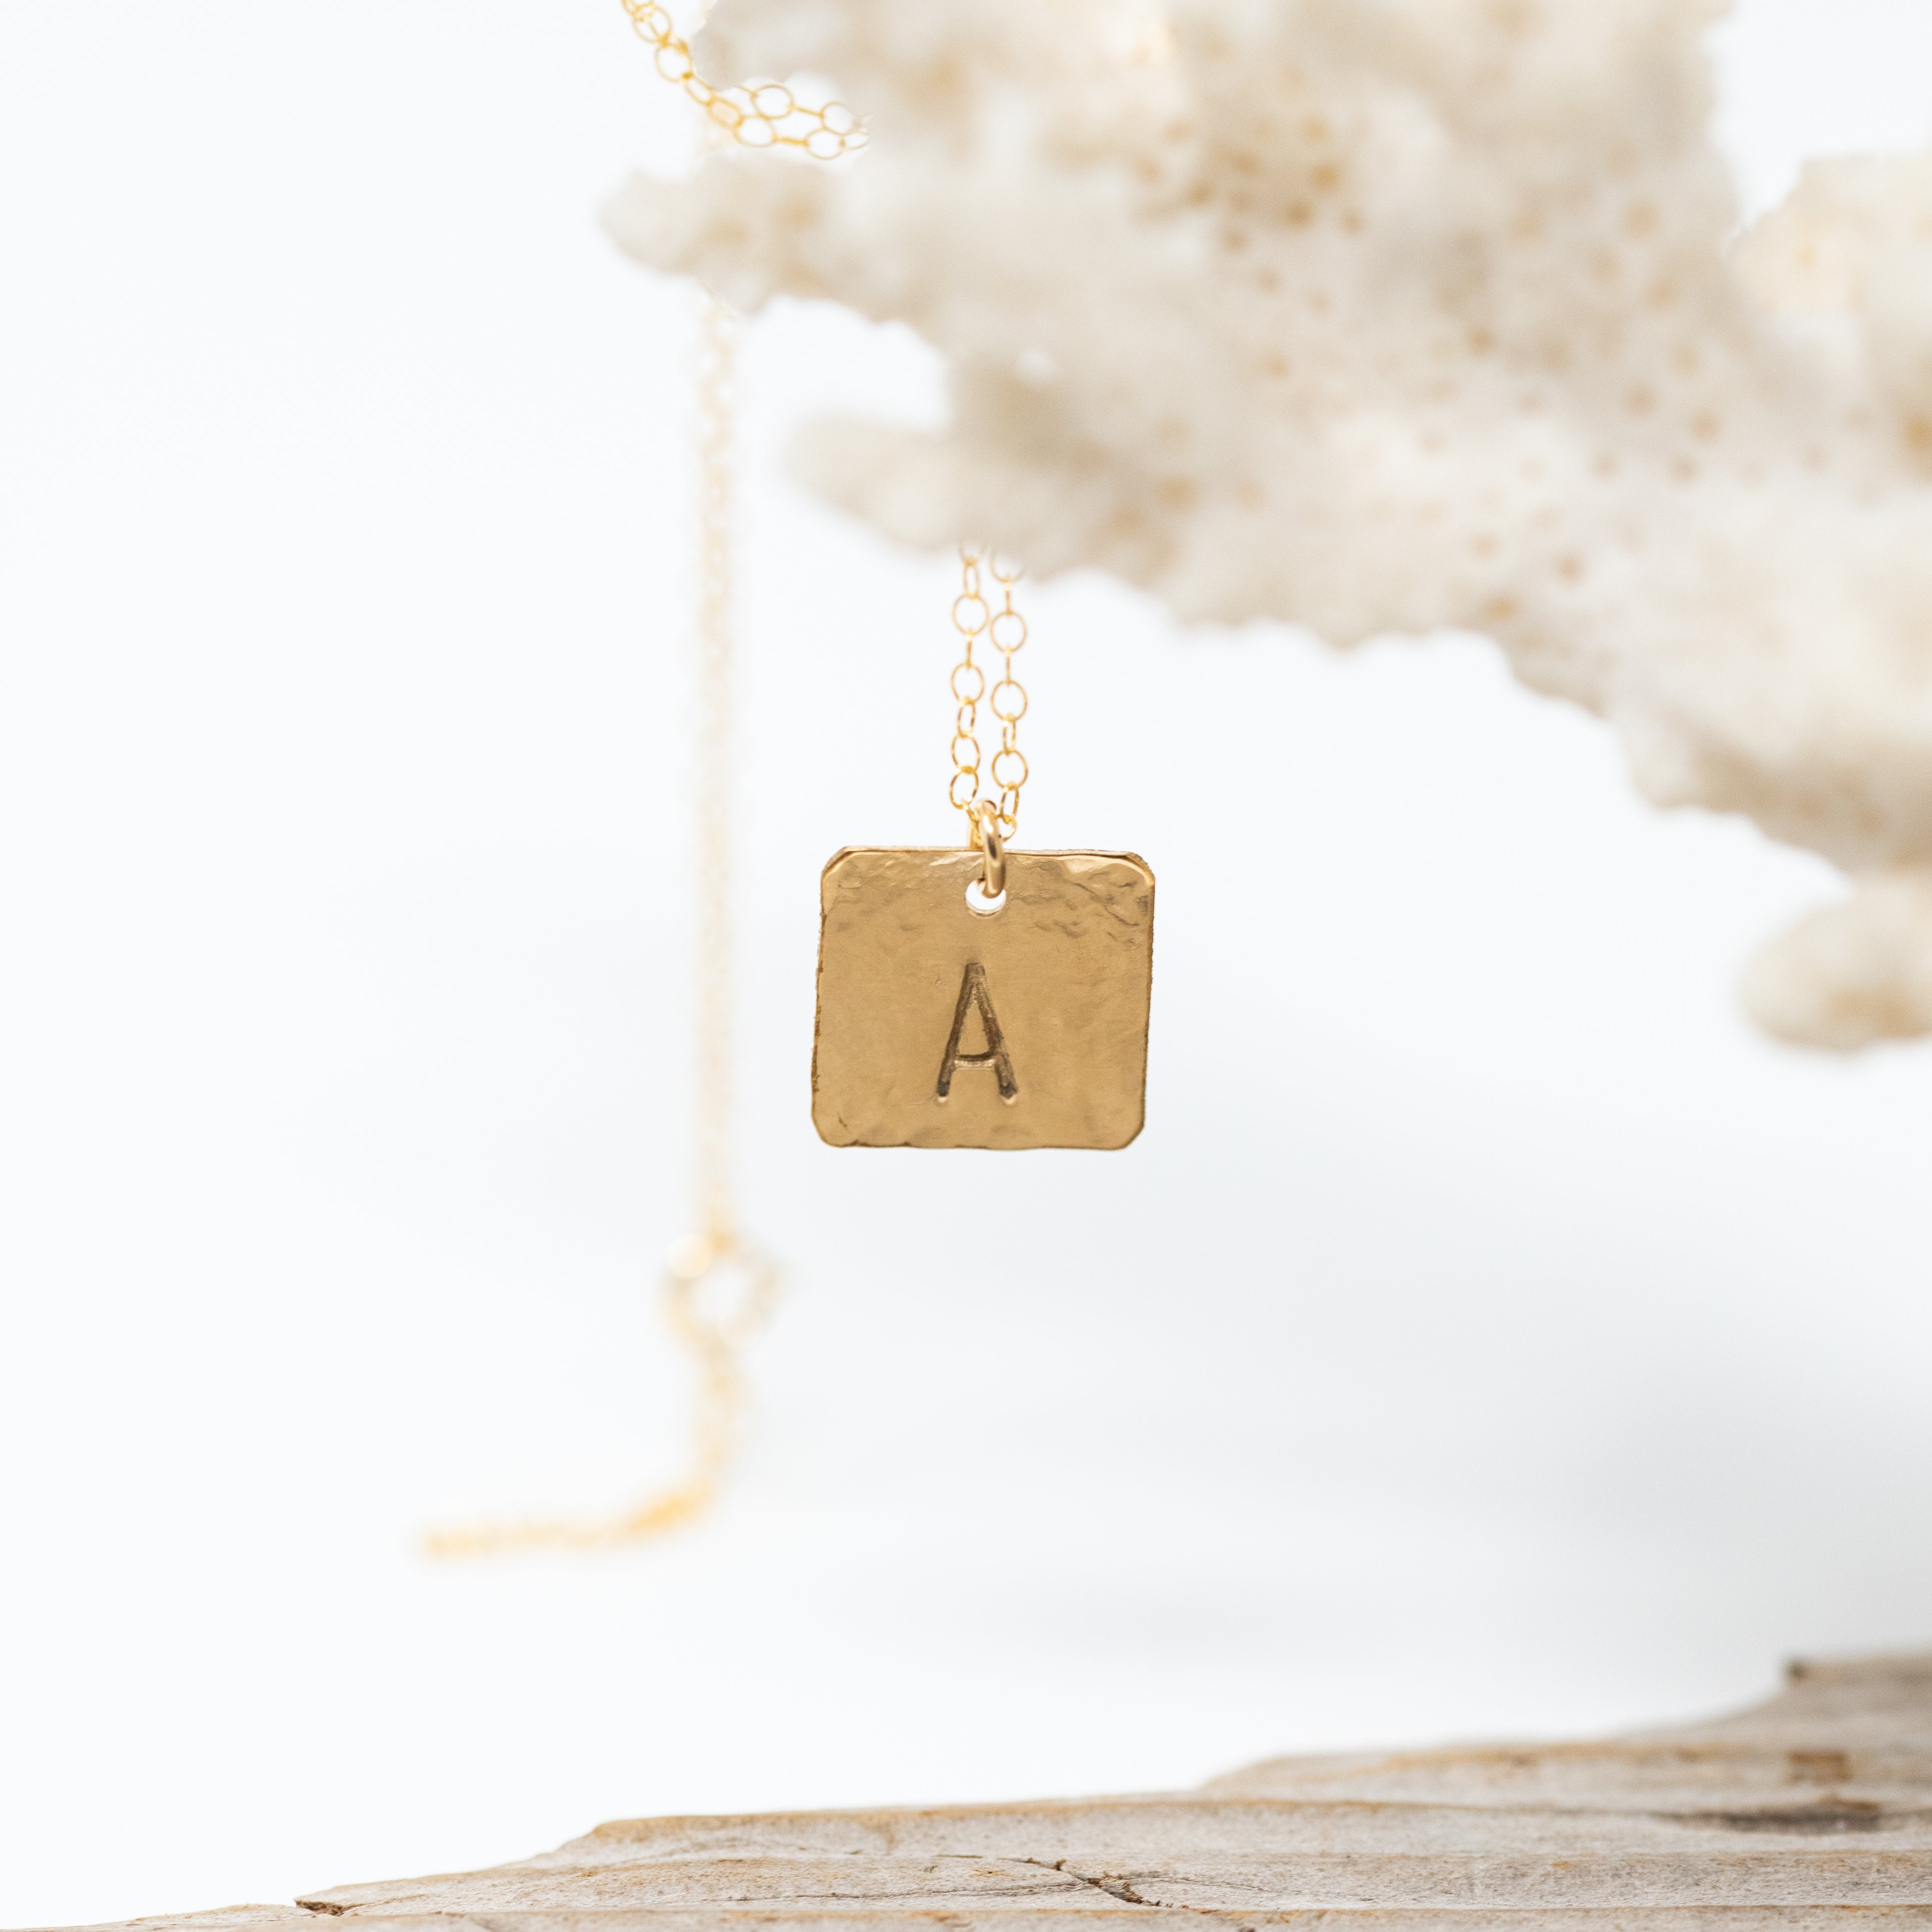 Small dime sized gold square with one large initial stamped onto it, attached to a chain. Hanging from a piece of coral. 